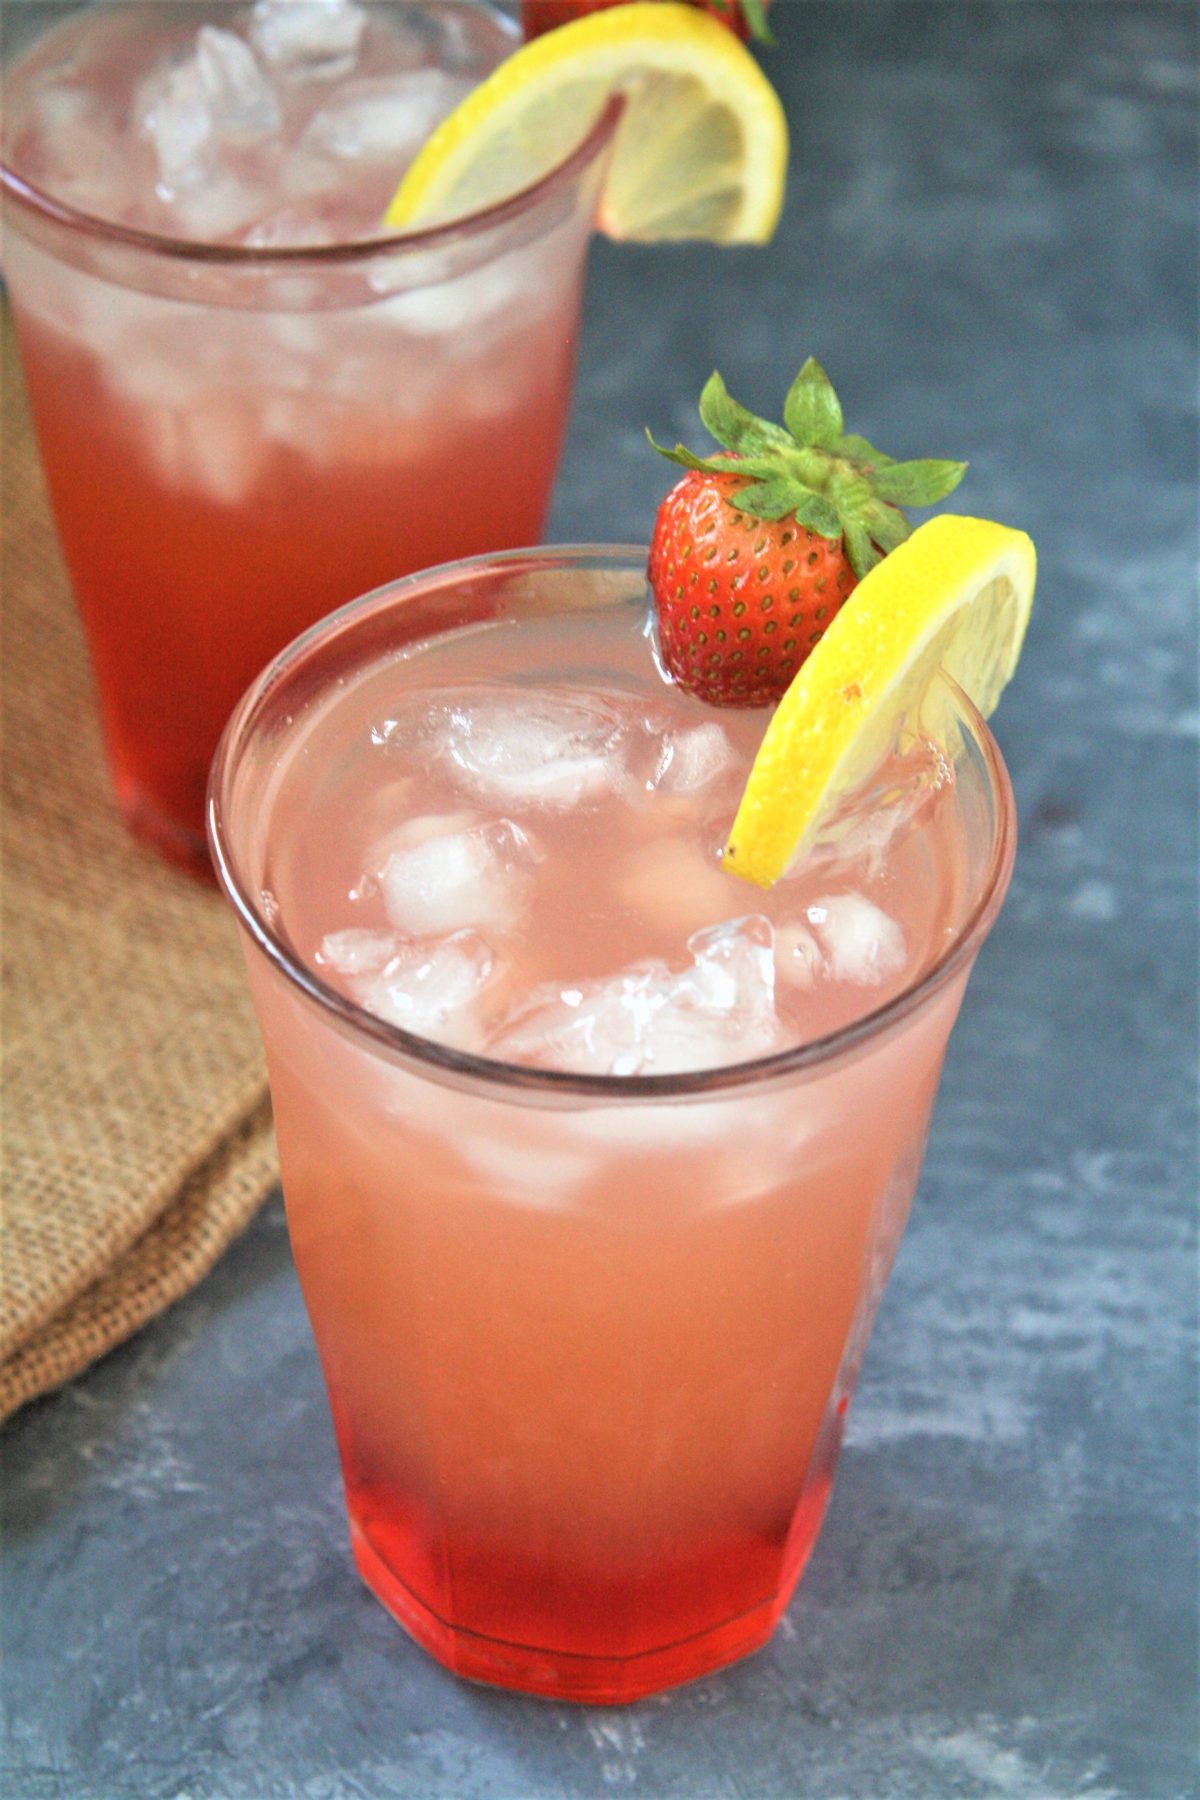 Sweet, tart, and refreshing. Strawberry Pink Lemonade is the drink you want to sip on at the beach, the park, or your Fourth of July cookout!